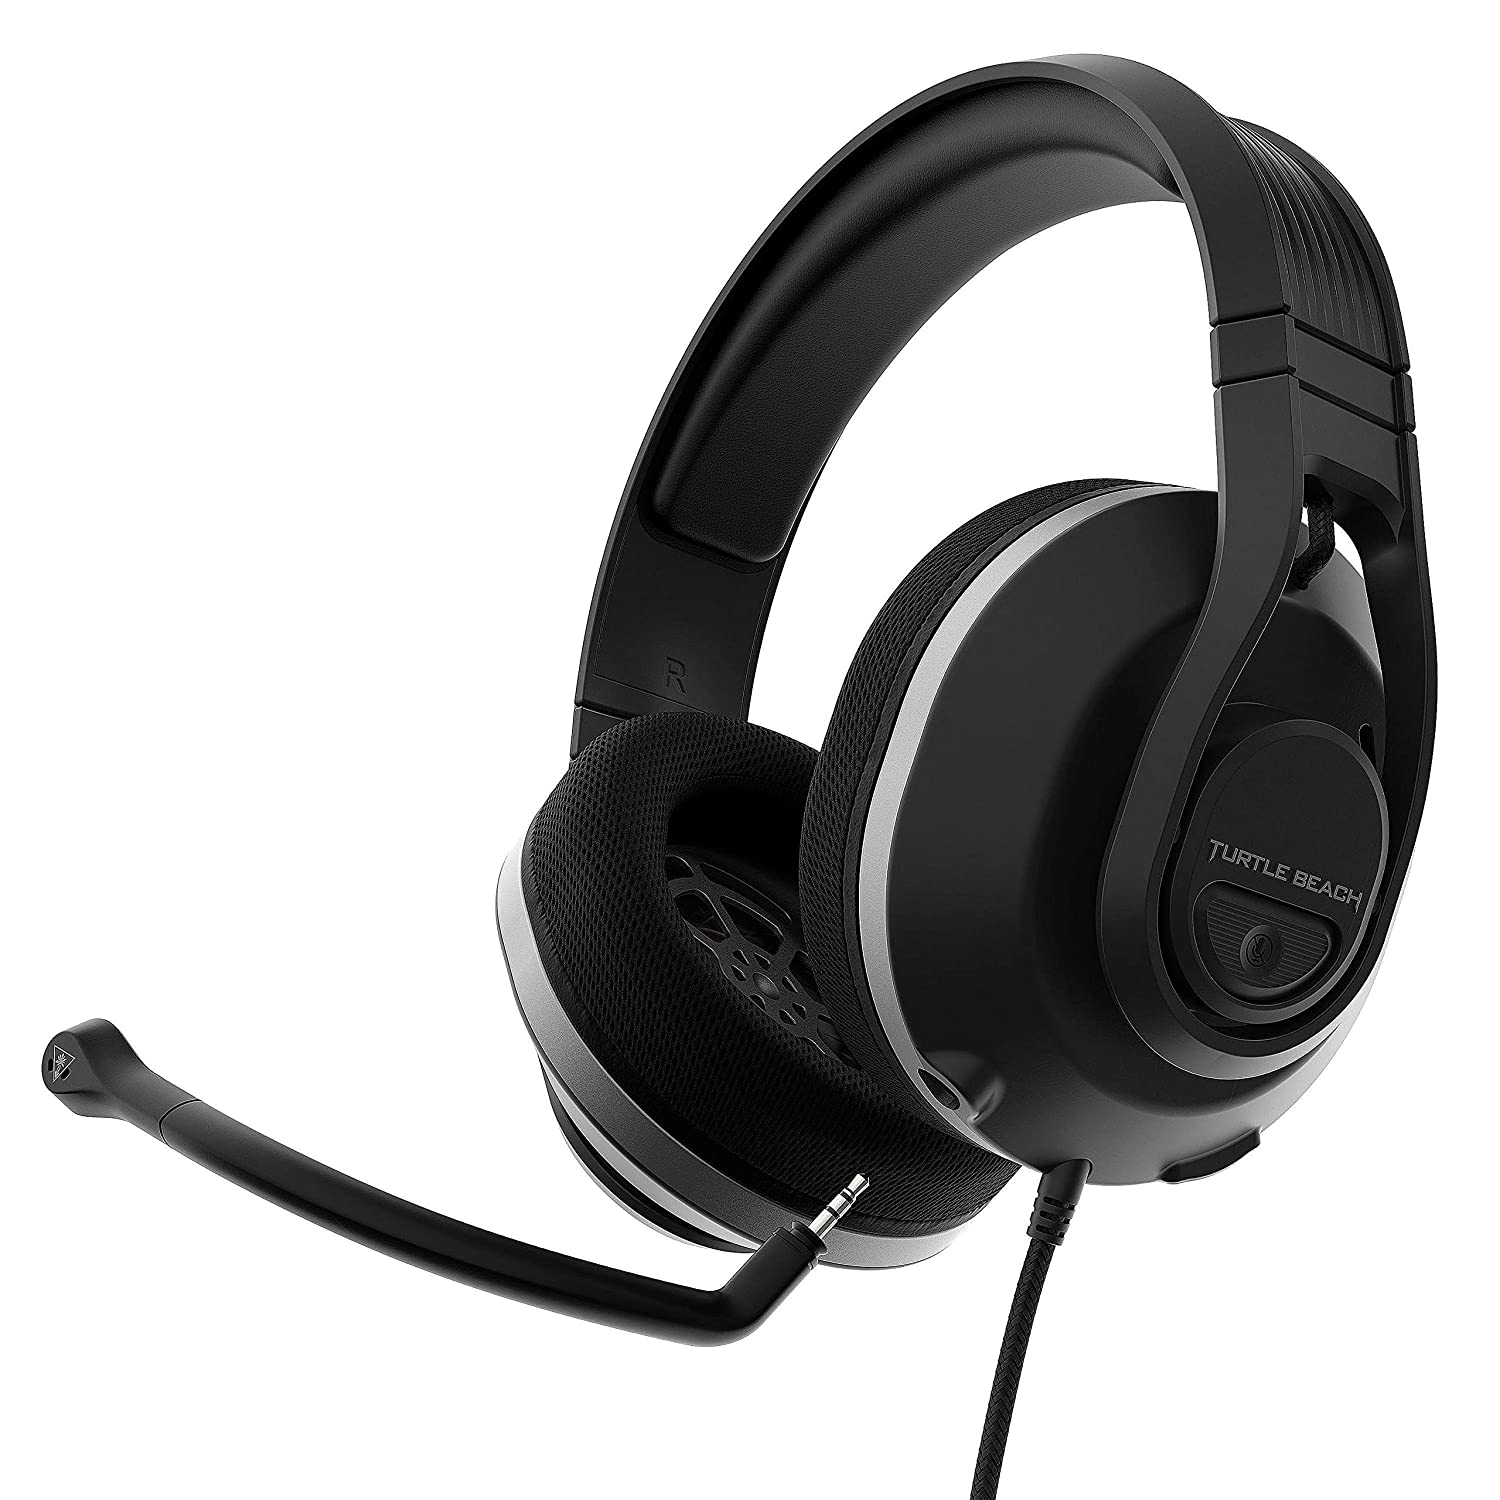 Headsets for the Xbox Series X and Series S.